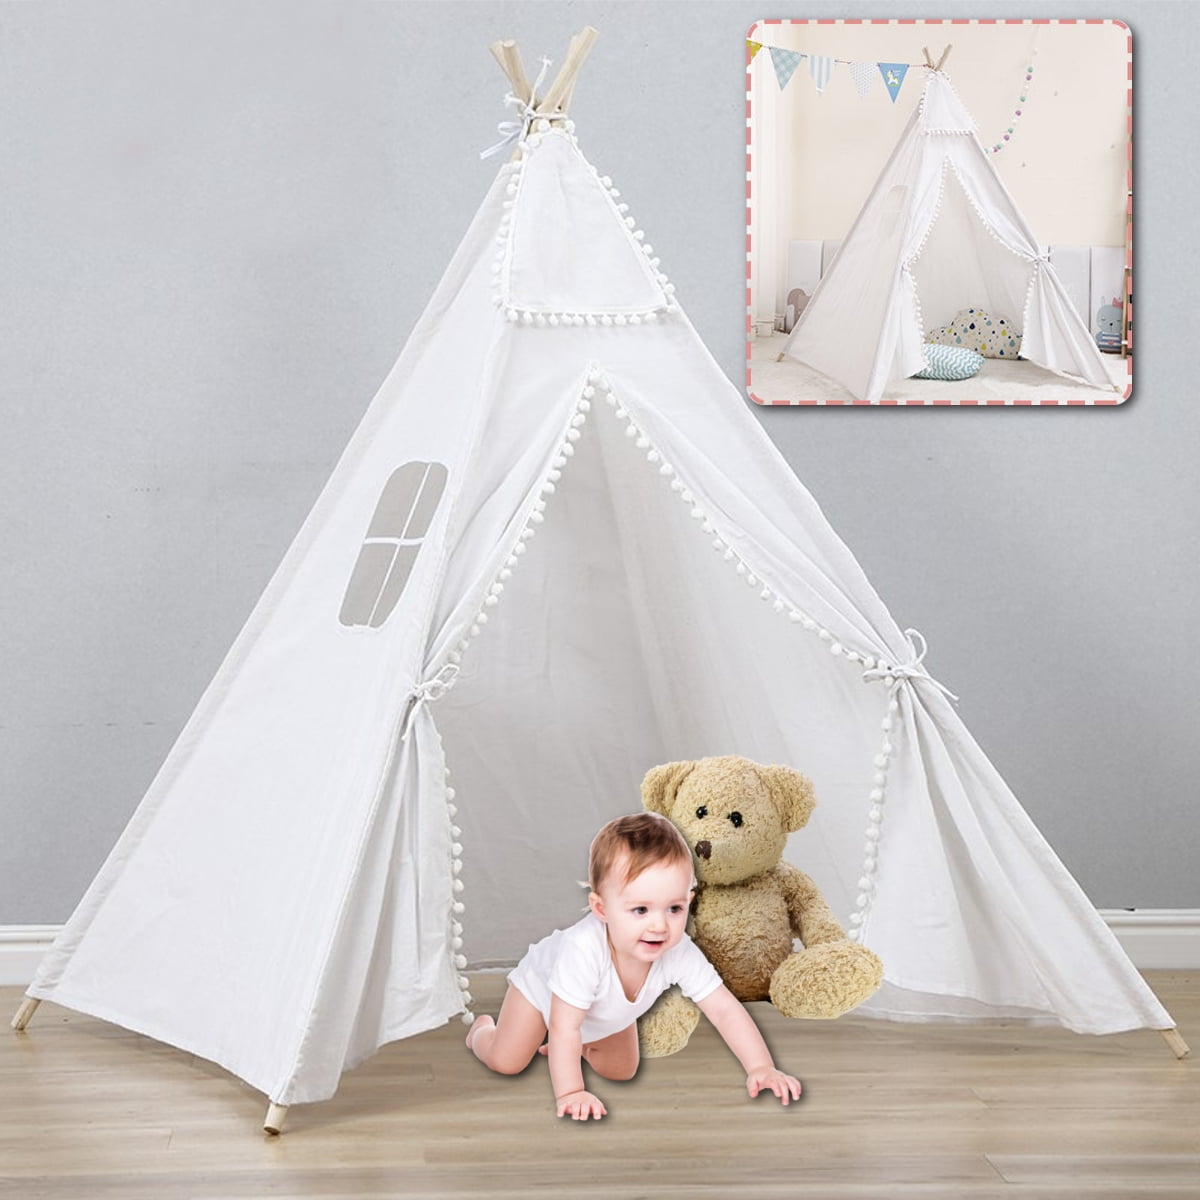 Indian Kids Teepee Tent Playhouse Cotton Canvas Triangle Wigwam Lace Type Game 